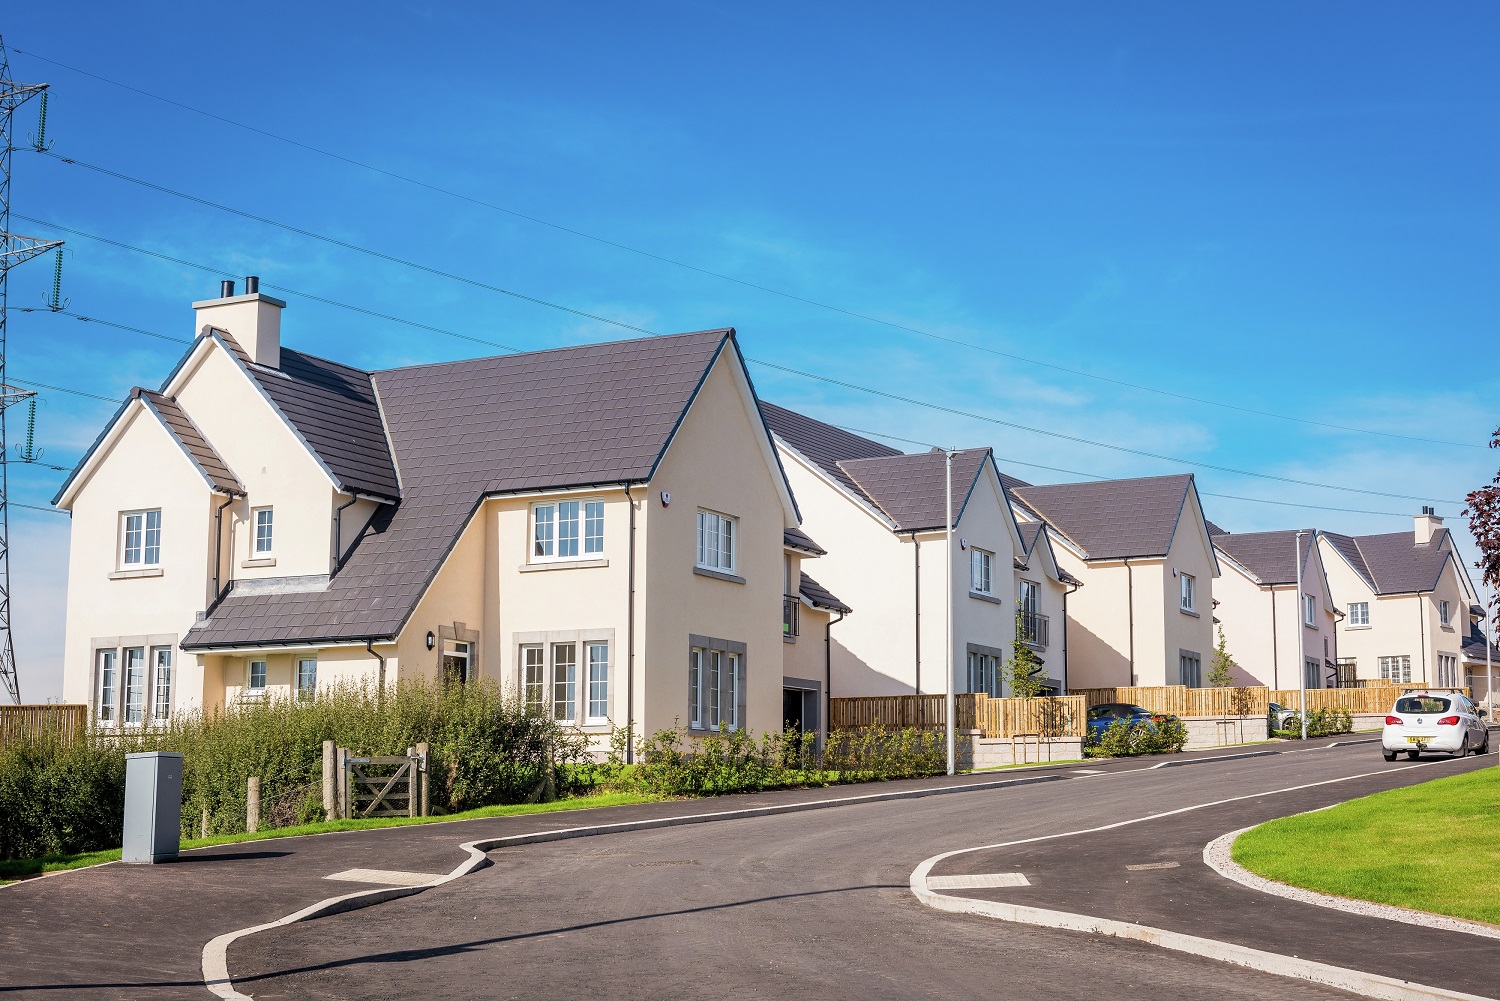 Cala submits proposals for Aberdeenshire and Aberdeen developments